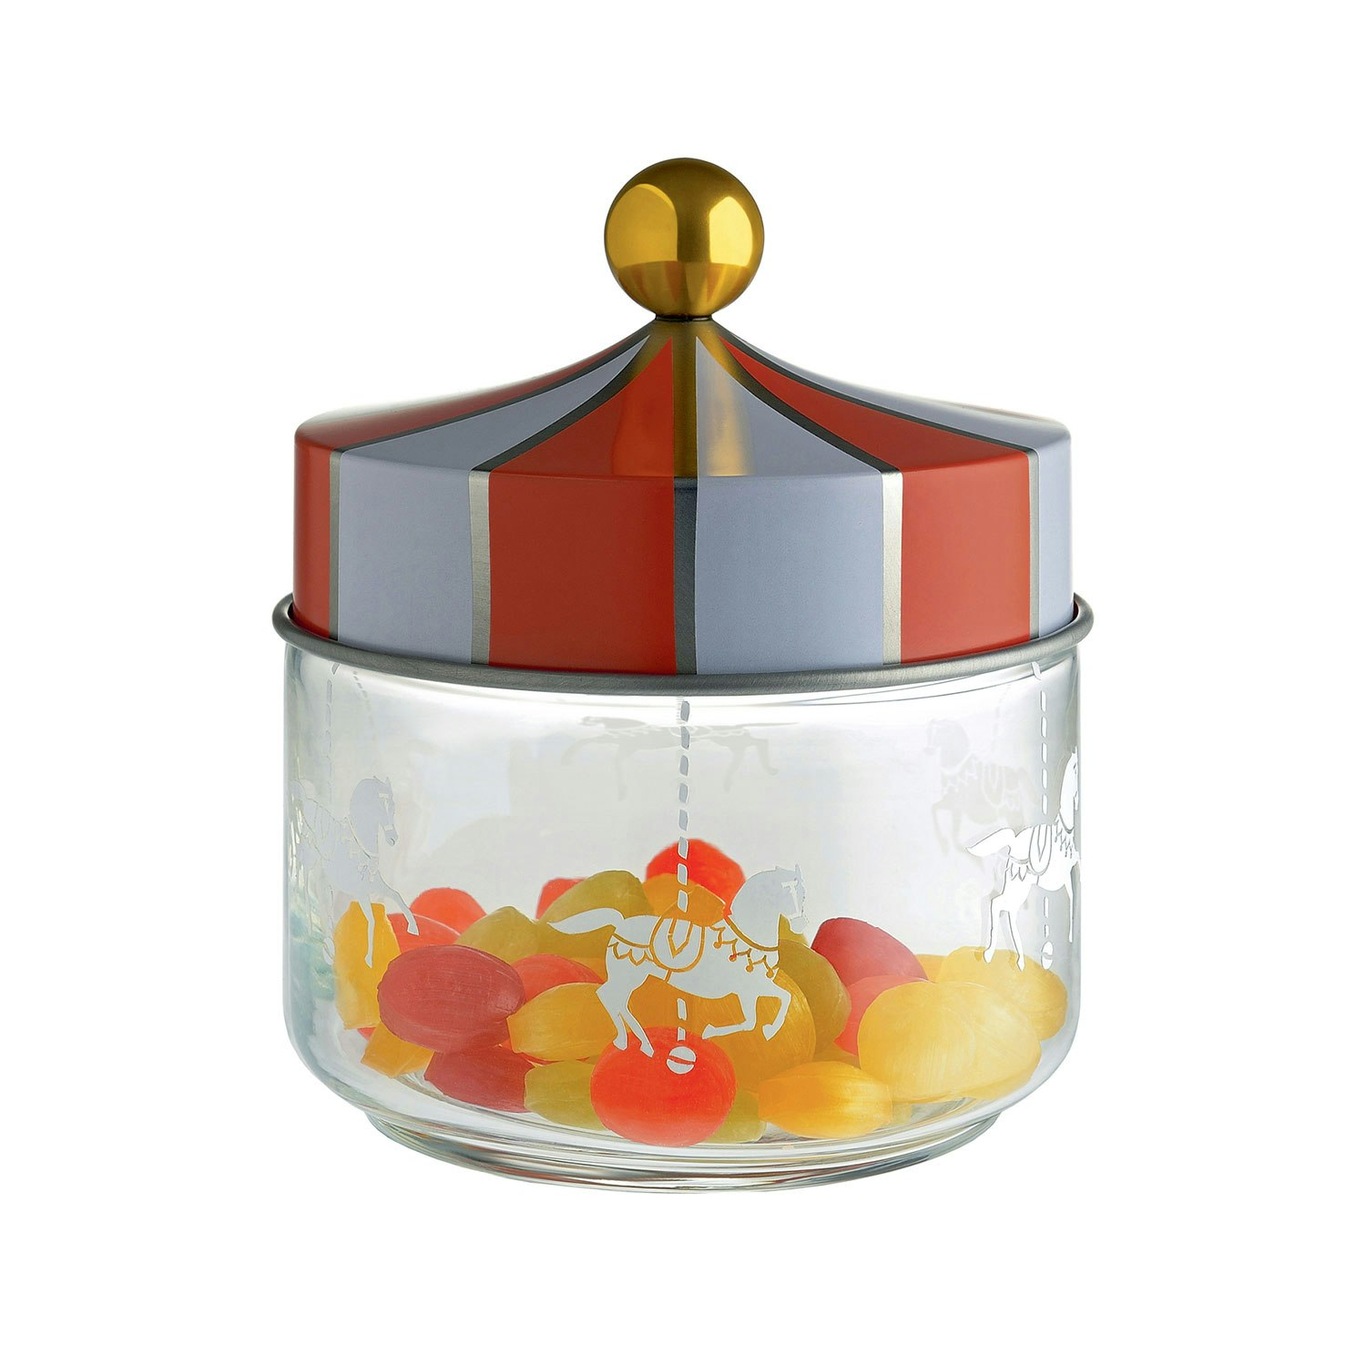 Buy Containers & Jars for Kitchen in India Upto 50% Off